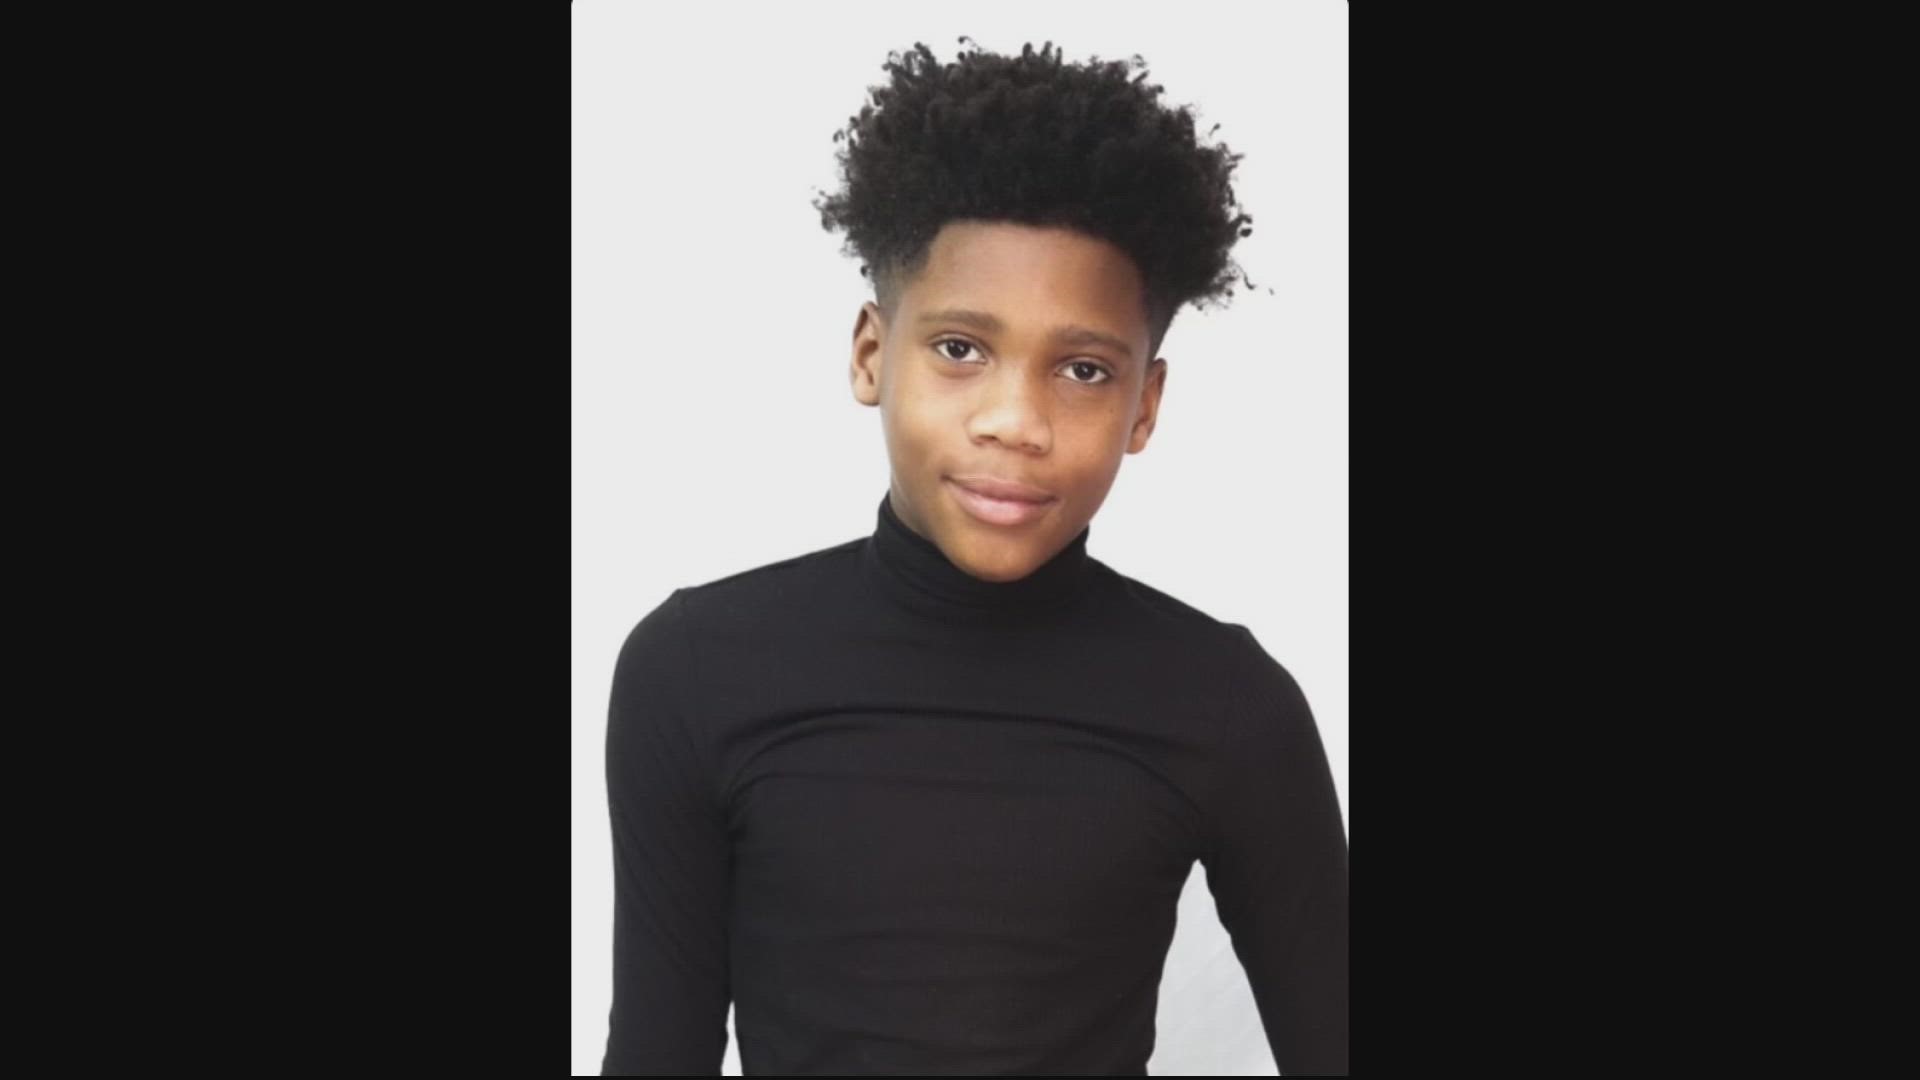 On Monday, DC Police identified the 15-year-old as Chase Poole of Northwest, D.C.